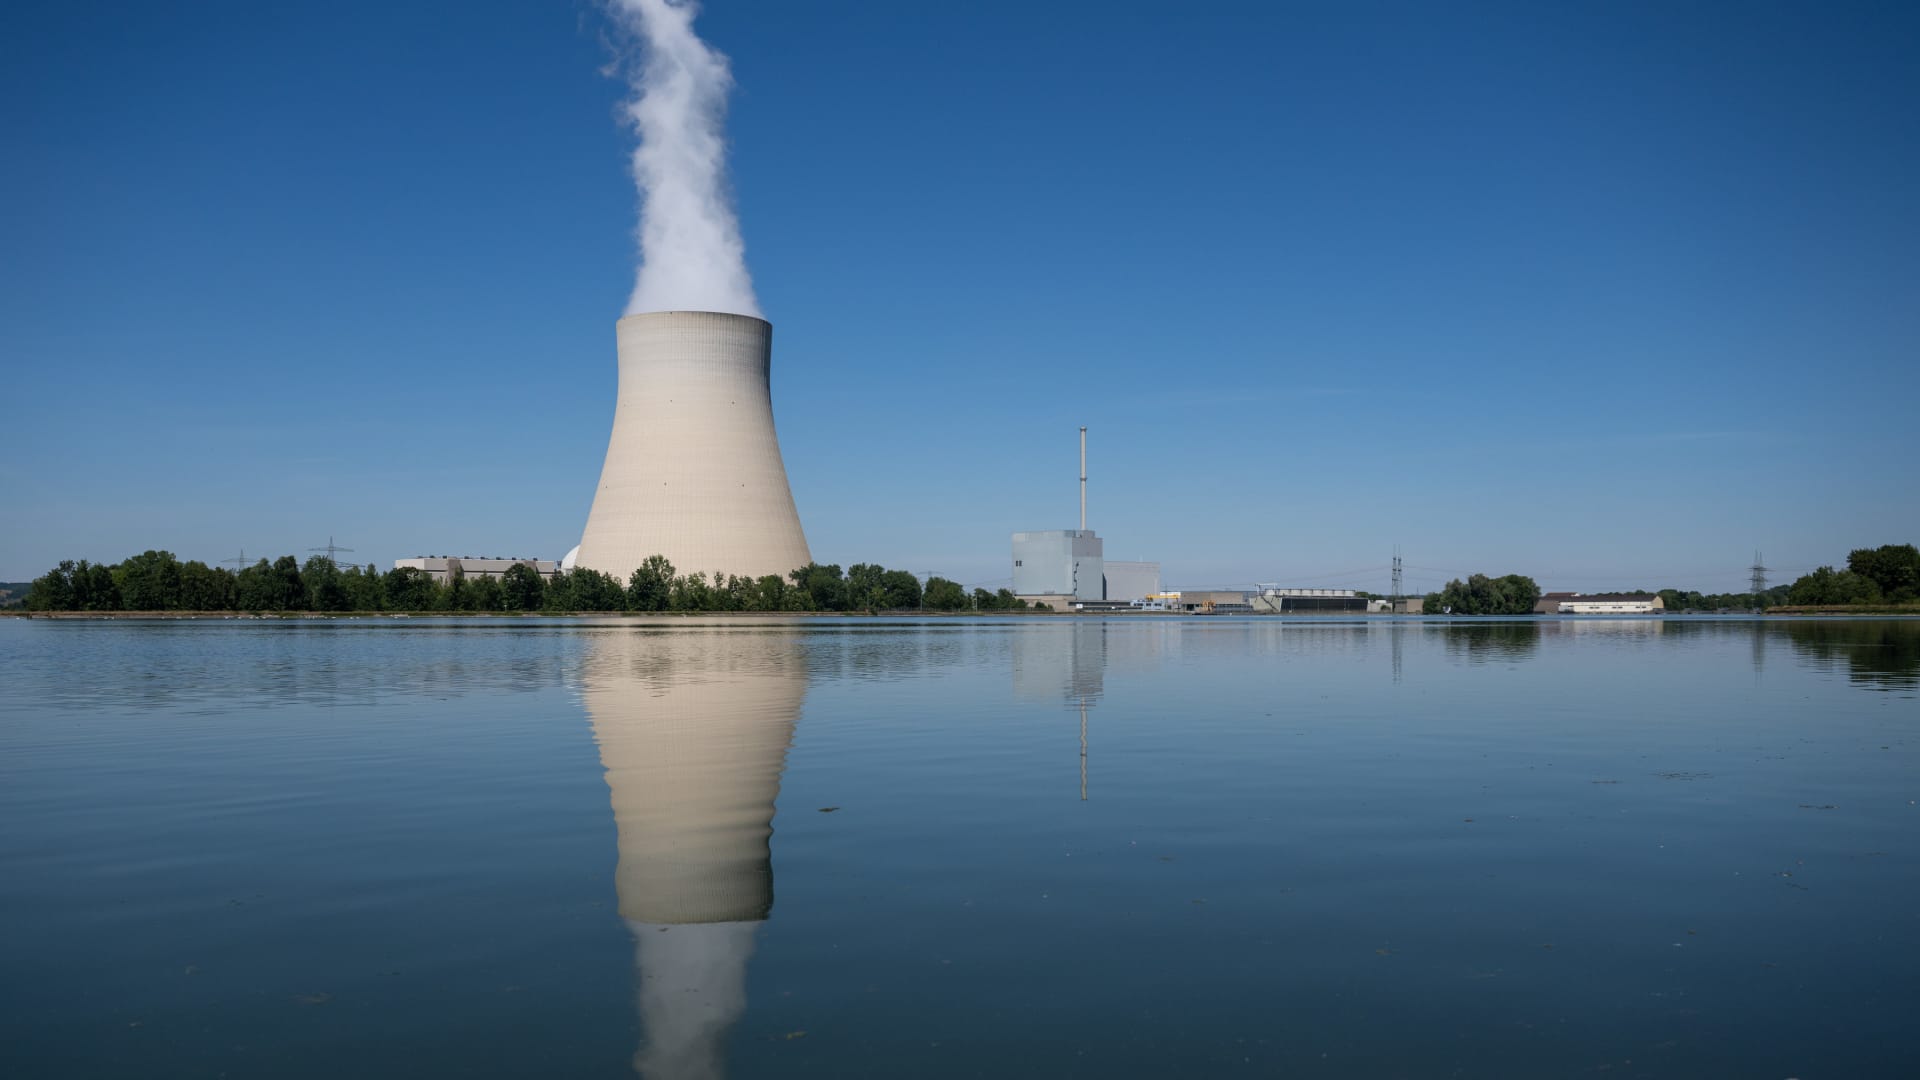 Goldman doesn’t see nuclear as a transformational tech for the future